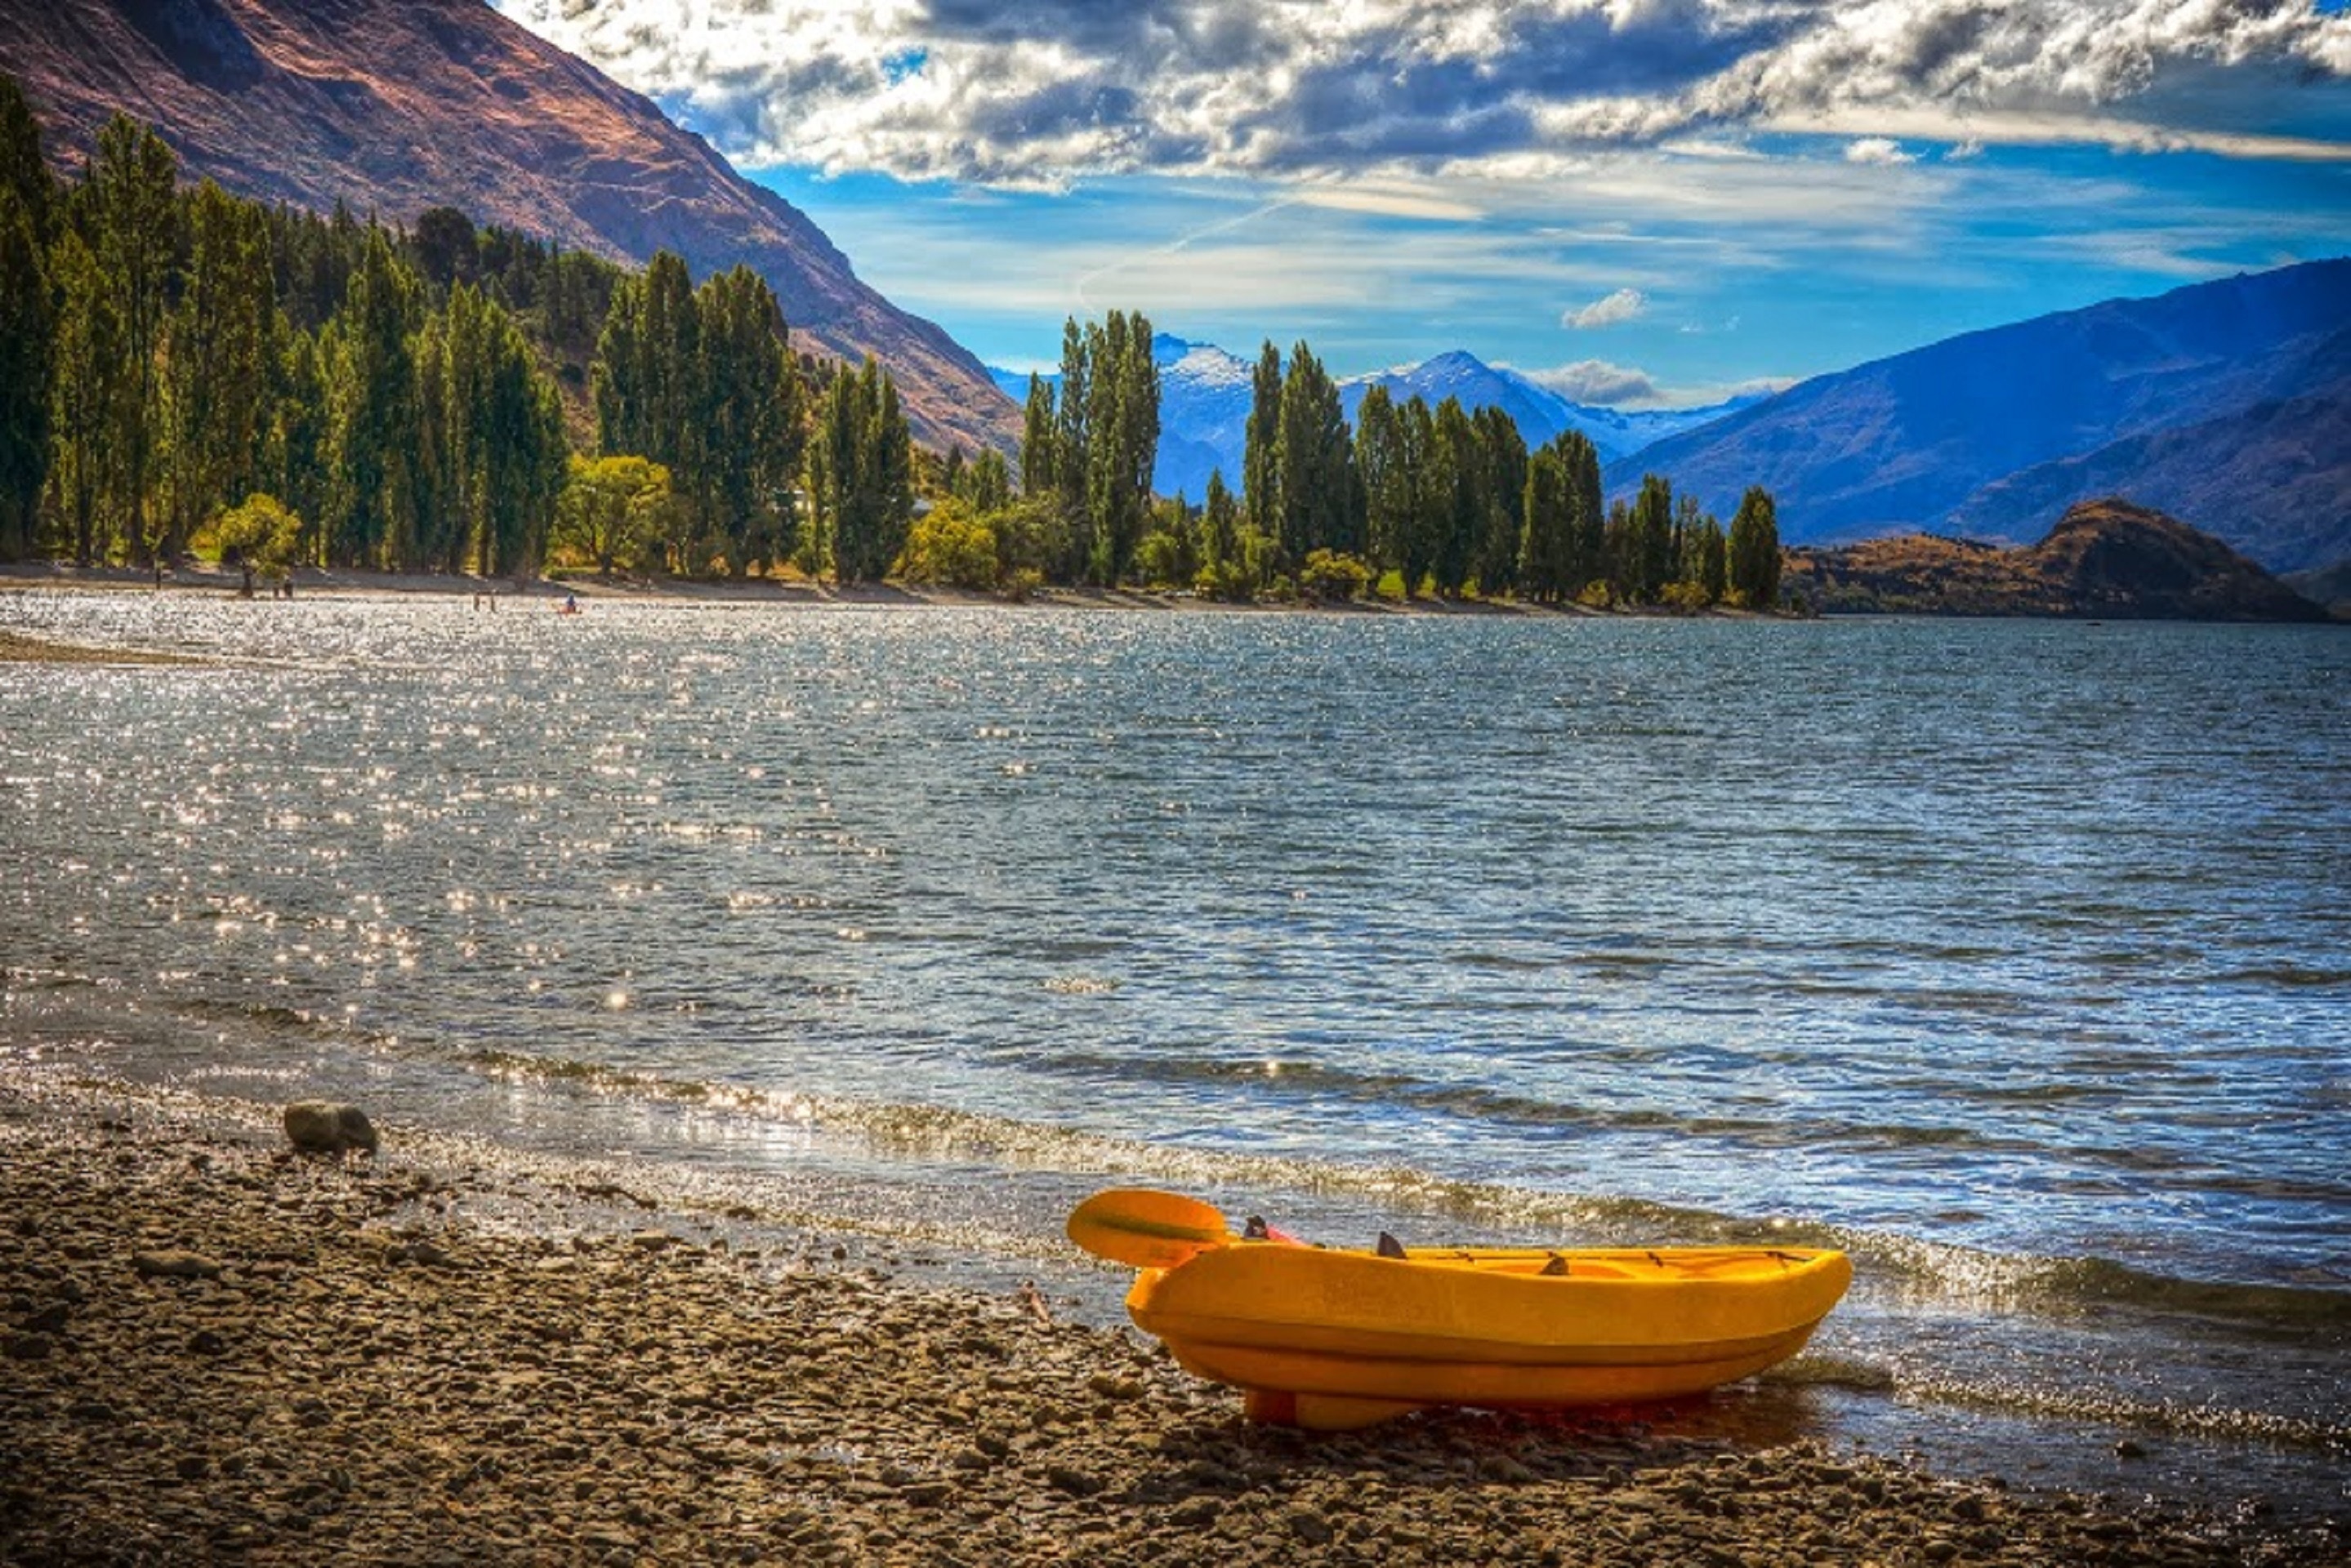 yellow kayak near body of water under blue sky during day time